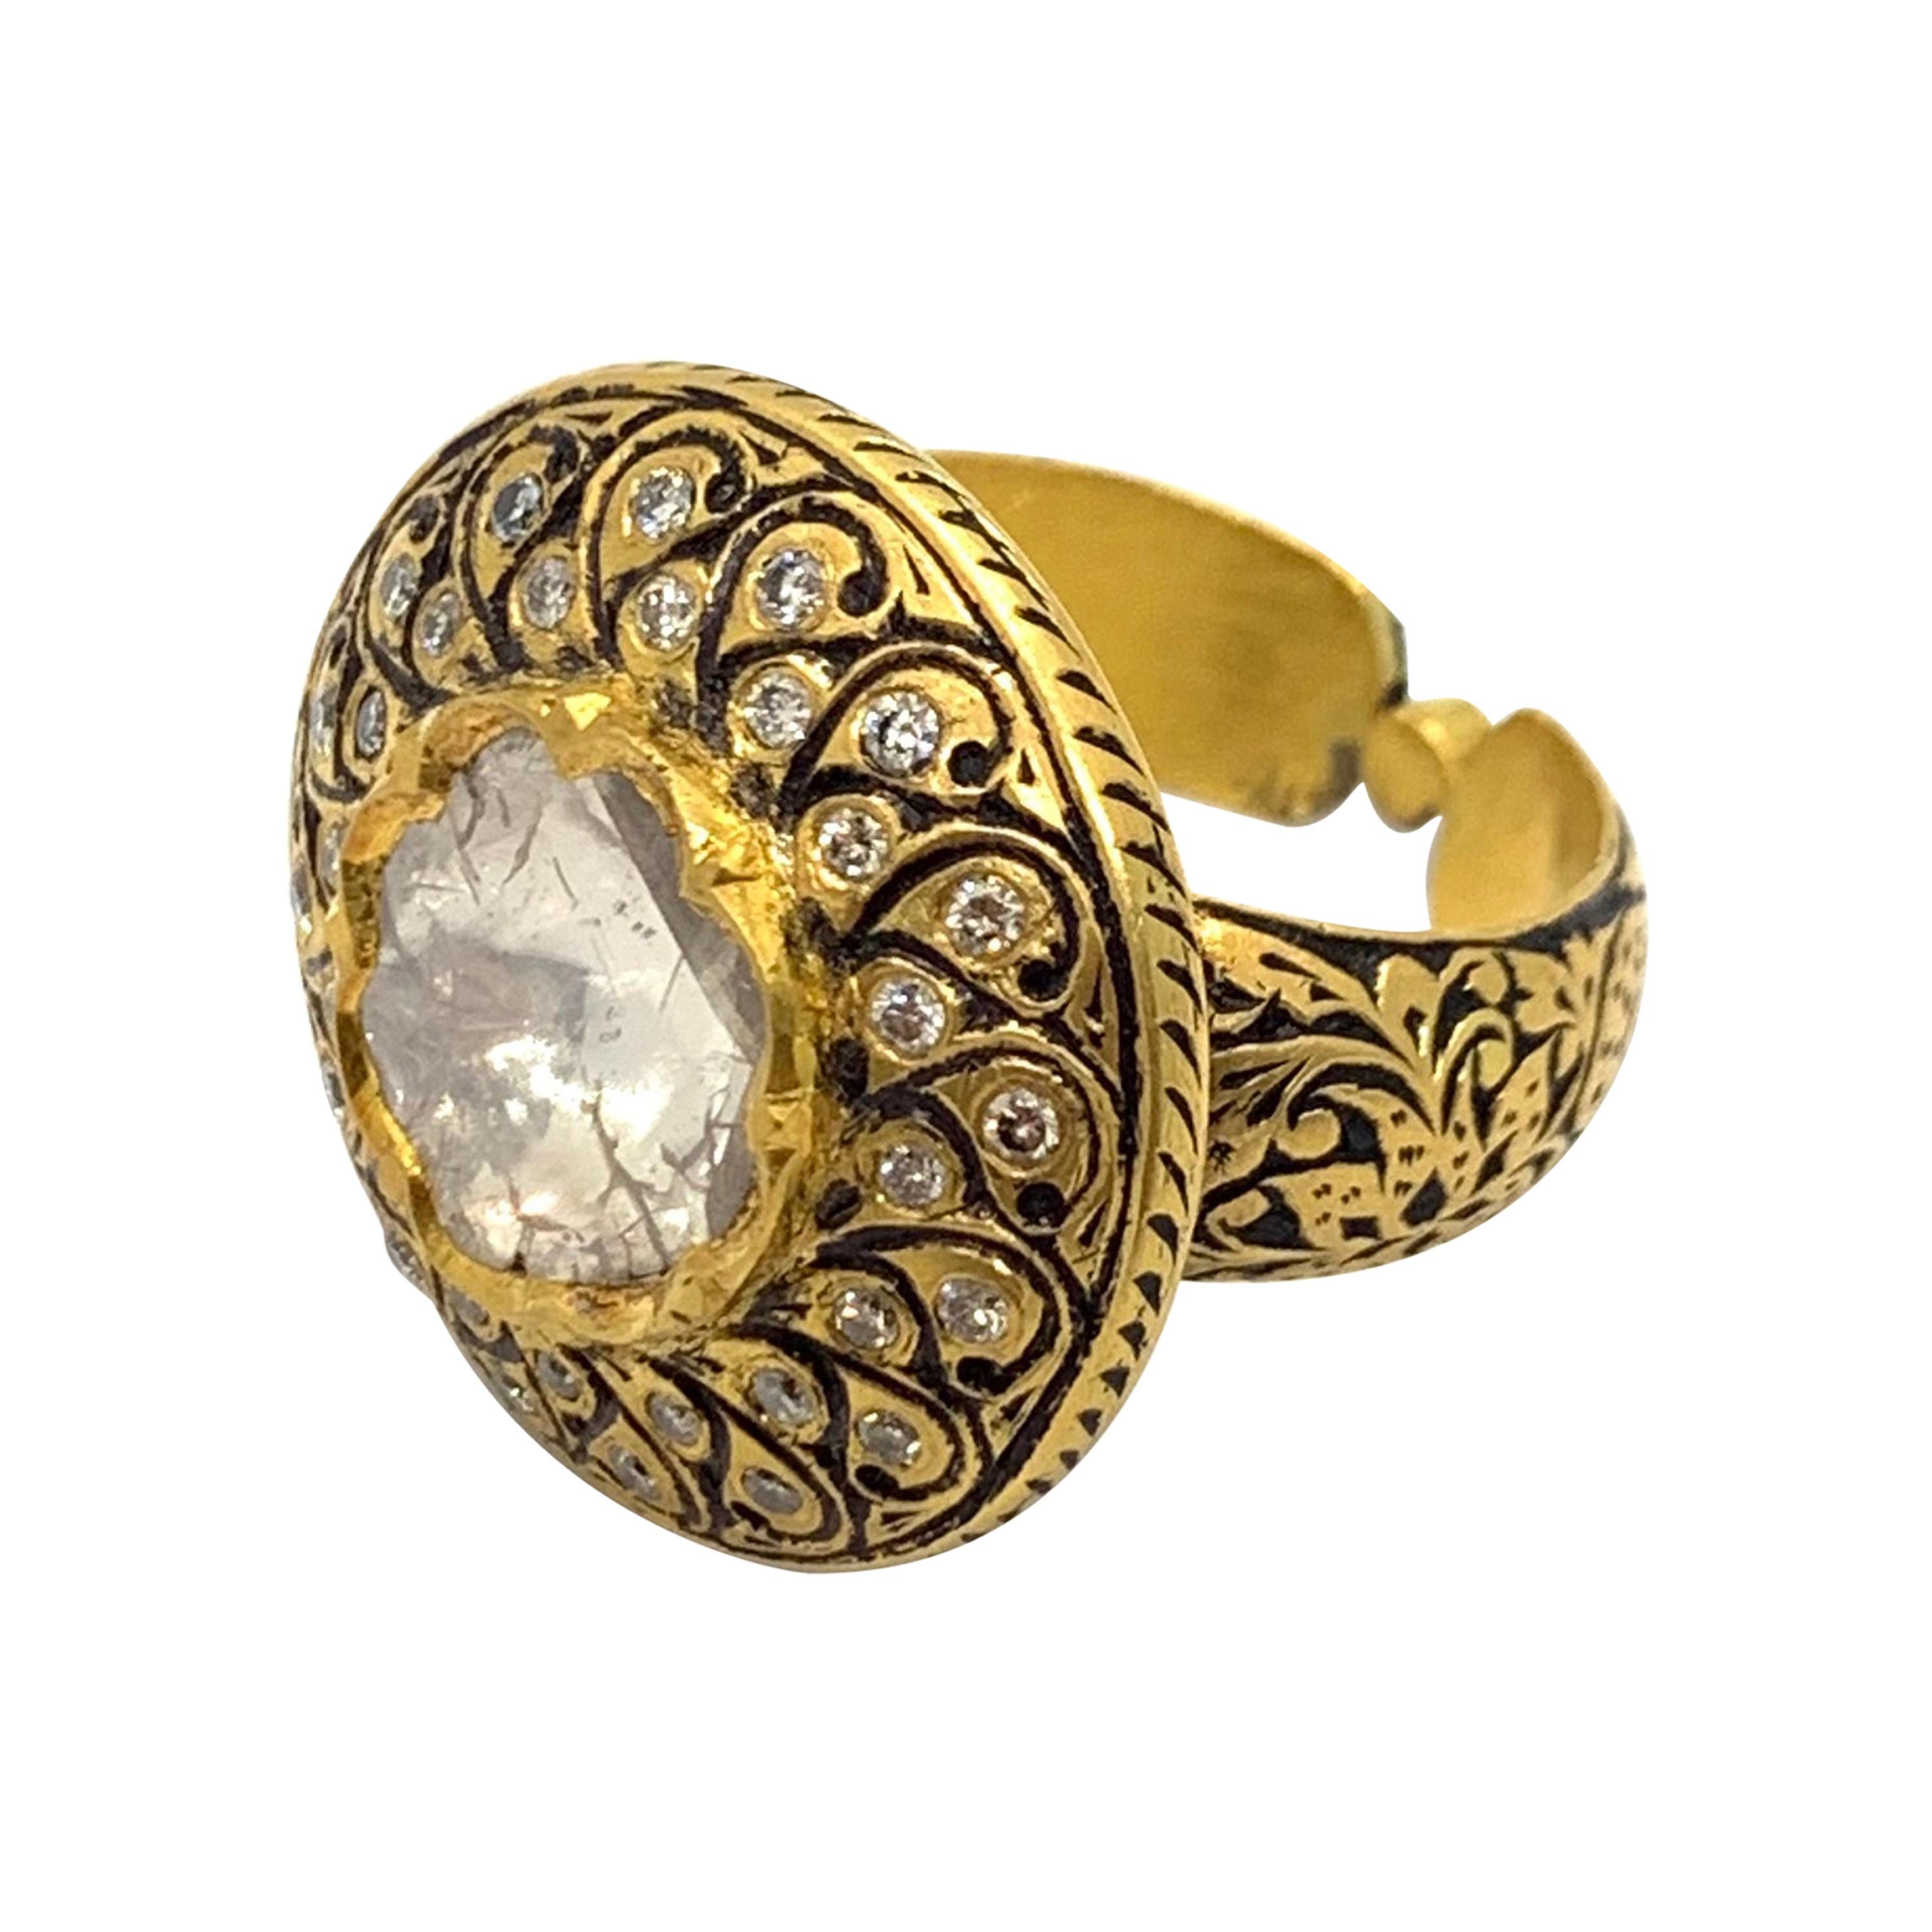 Diamond Cocktail Ring Handcrafted in 18k Yellow Gold with Enamel Work